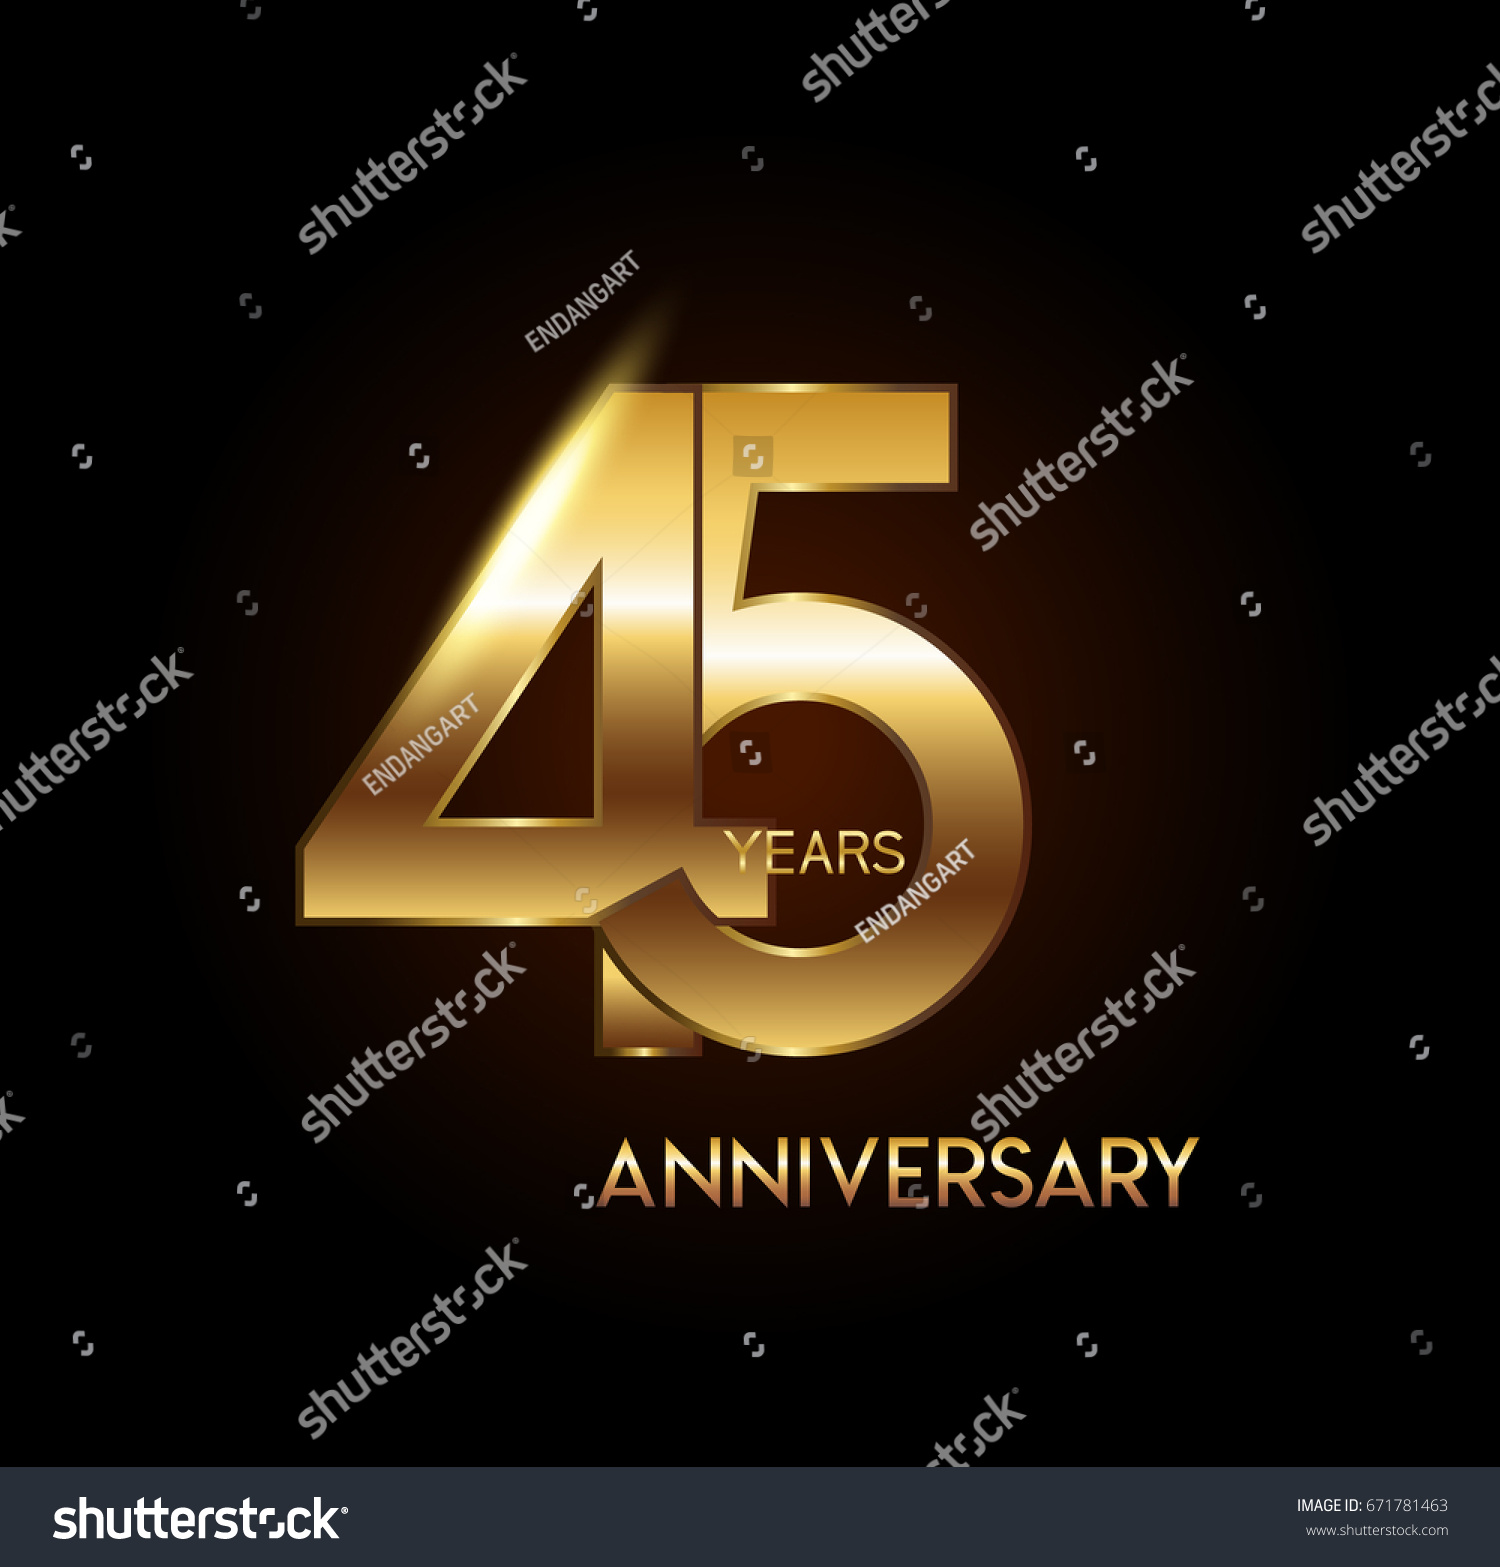 7,123 45 year celebration Images, Stock Photos & Vectors | Shutterstock